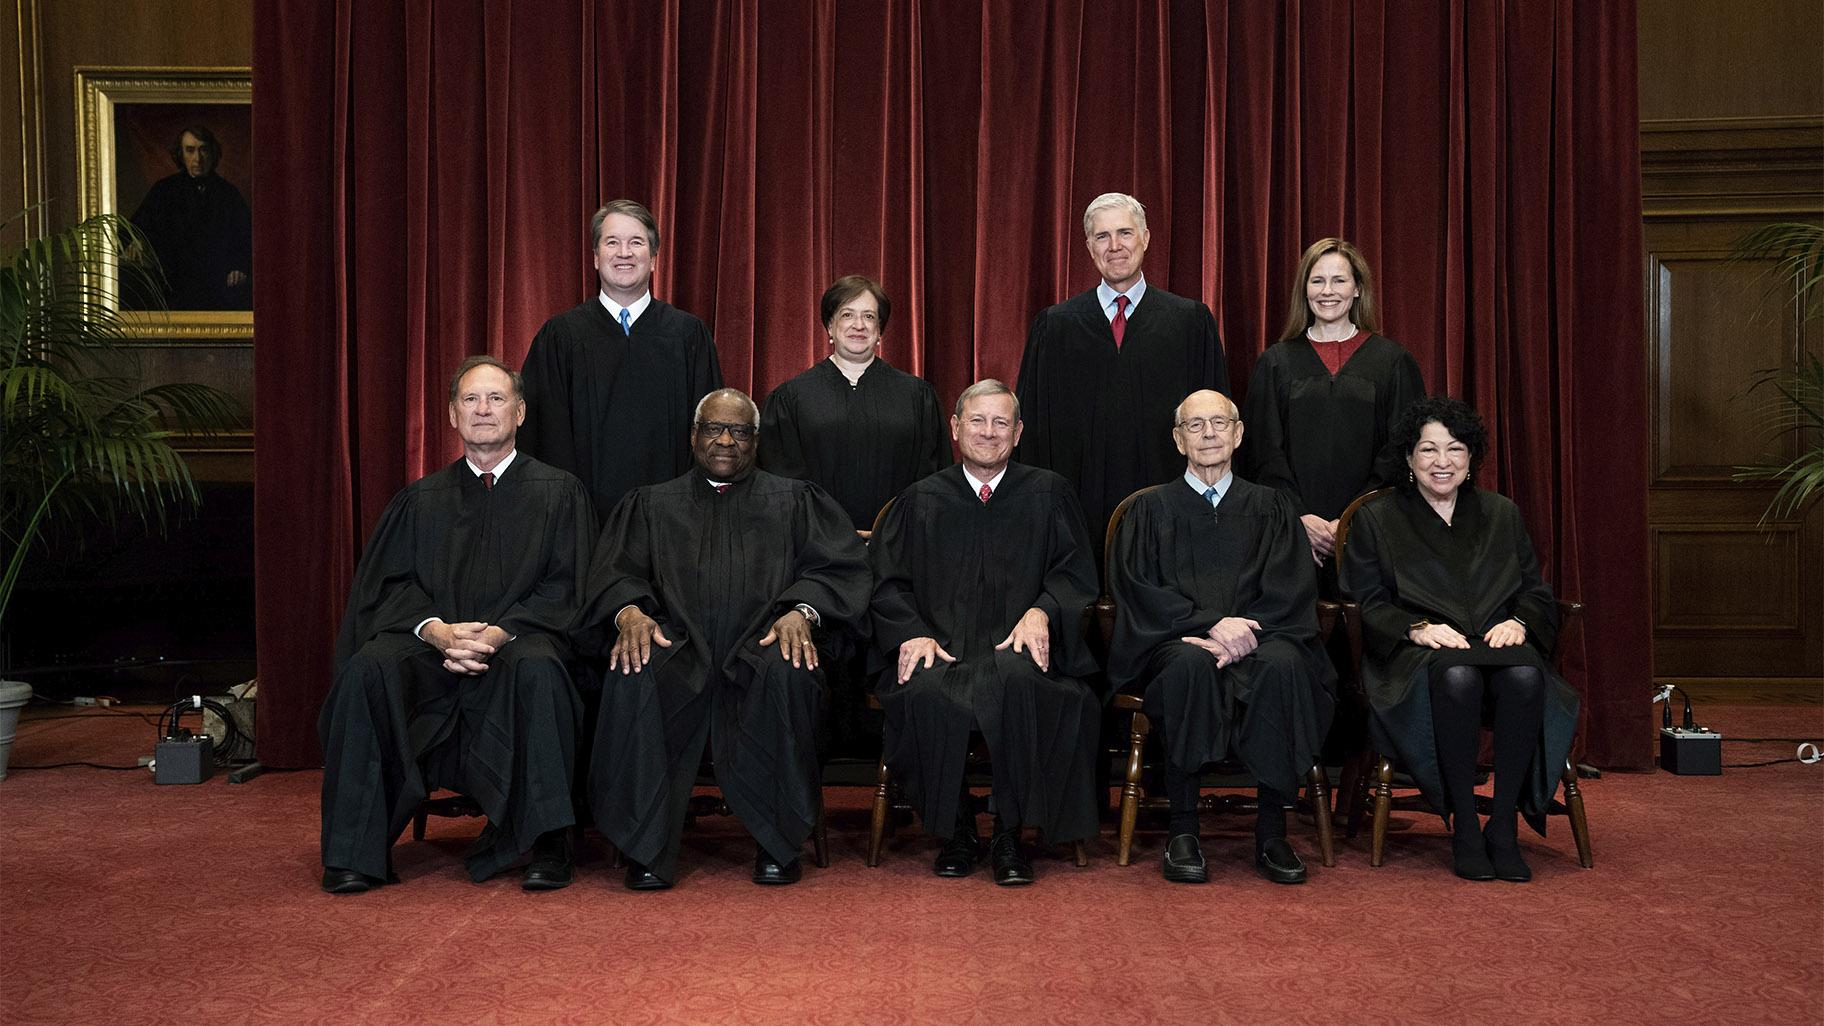 FILE - On April 23, 2021, members of the Supreme Court File Photo pose for a group photo at the Supreme Court in Washington.  Seated from left to right are Associate Judge Samuel Alito, Associate Judge Clarence Thomas, Chief Justice John Roberts, Associate Judge Stephen Breyer and Associate Judge Sonia Sotomayor, Standing from left are Associate Judge Brett Kavanaugh, Associate Judge Elena Kagan, Associate Judge Neil Gorsuch and Associate Judge Amy Coney Barrett.  (Erin Schaff via AP)